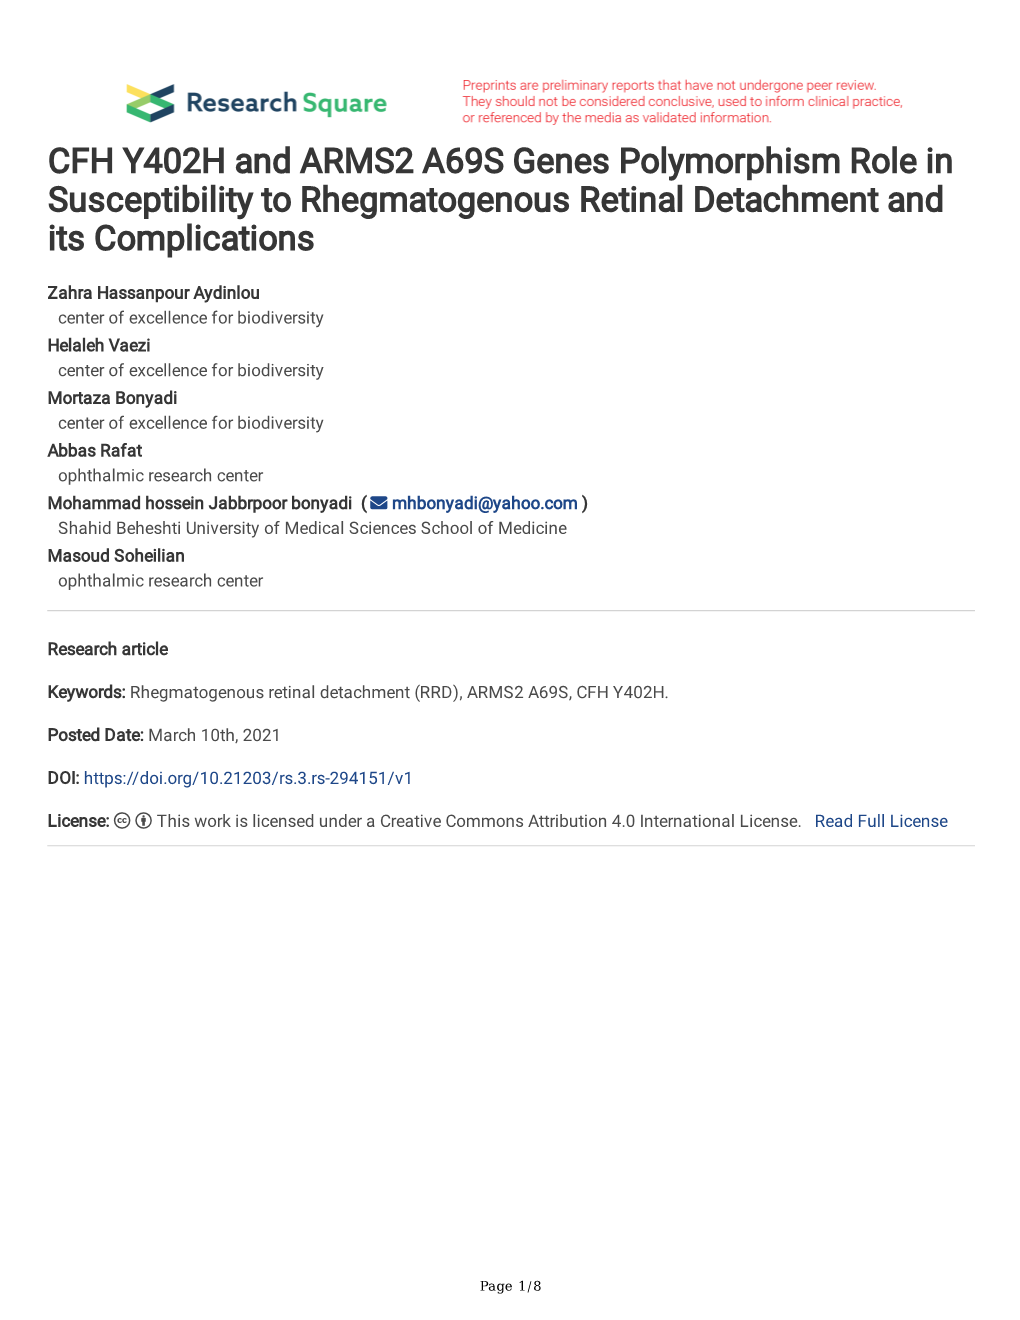 CFH Y402H and ARMS2 A69S Genes Polymorphism Role in Susceptibility to Rhegmatogenous Retinal Detachment and Its Complications